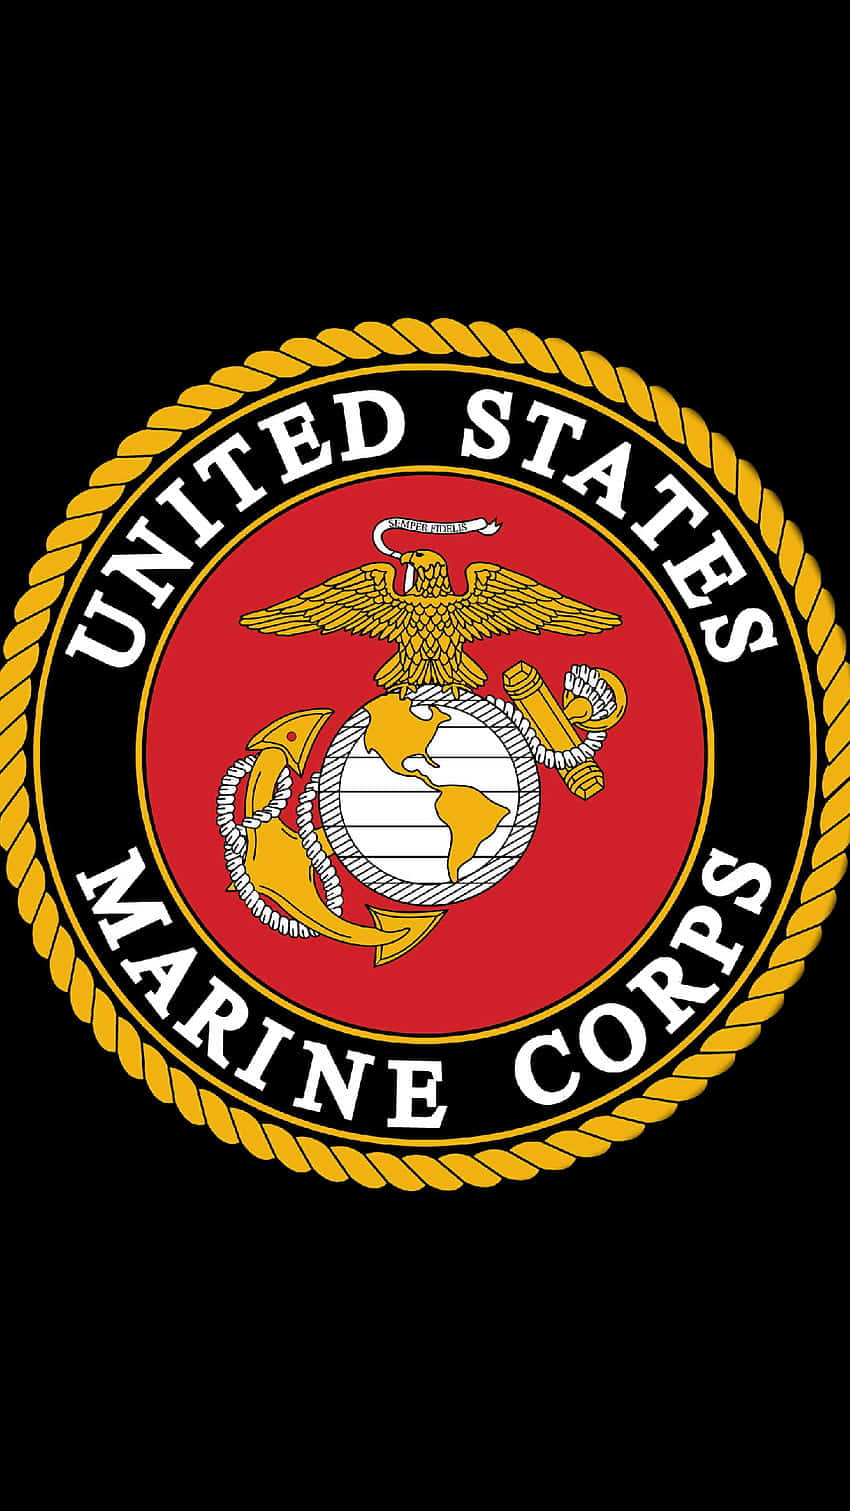 Marine Corps iPhone Wallpaper by thewill on deviantART  Marine corps Usmc  wallpaper Usmc quotes